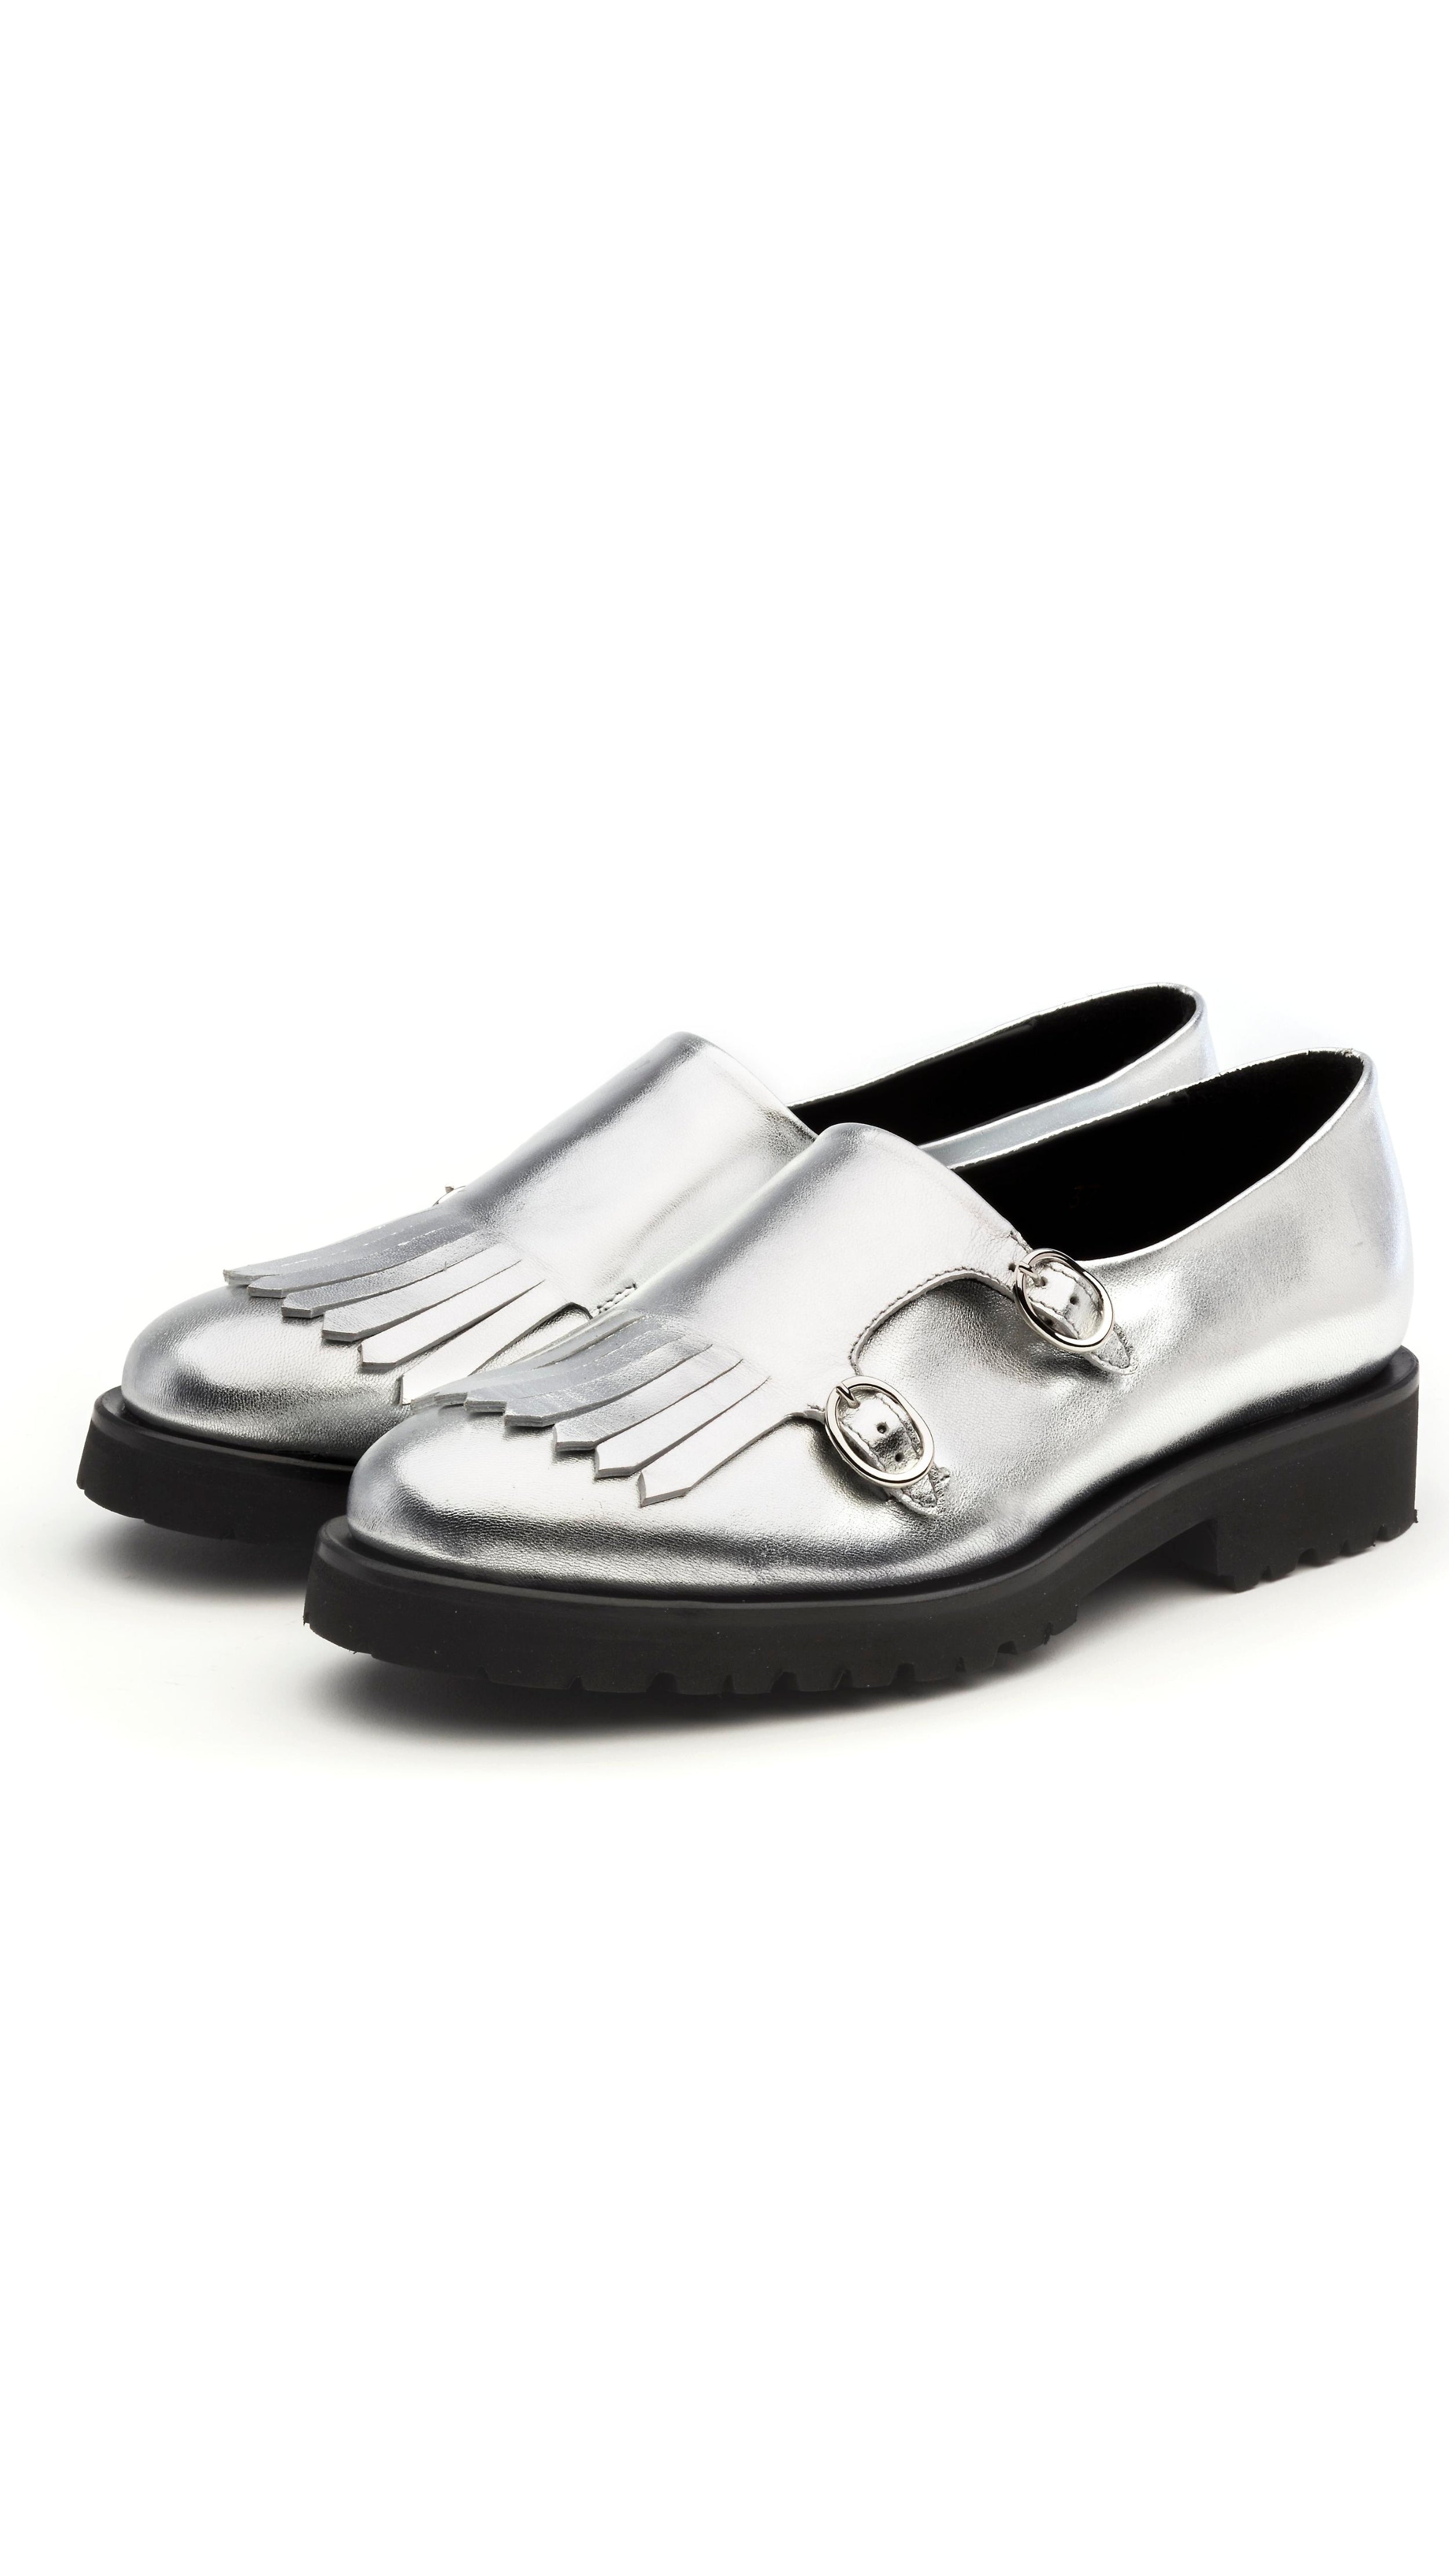 Rupert Sanderson The Cedar Brogues are handcrafted in Italy with luxurious soft metallic silver calf skin. They have side buckles and fringing to the toe for a distinctive finish. The 10mm platform heel. Facing front and side.